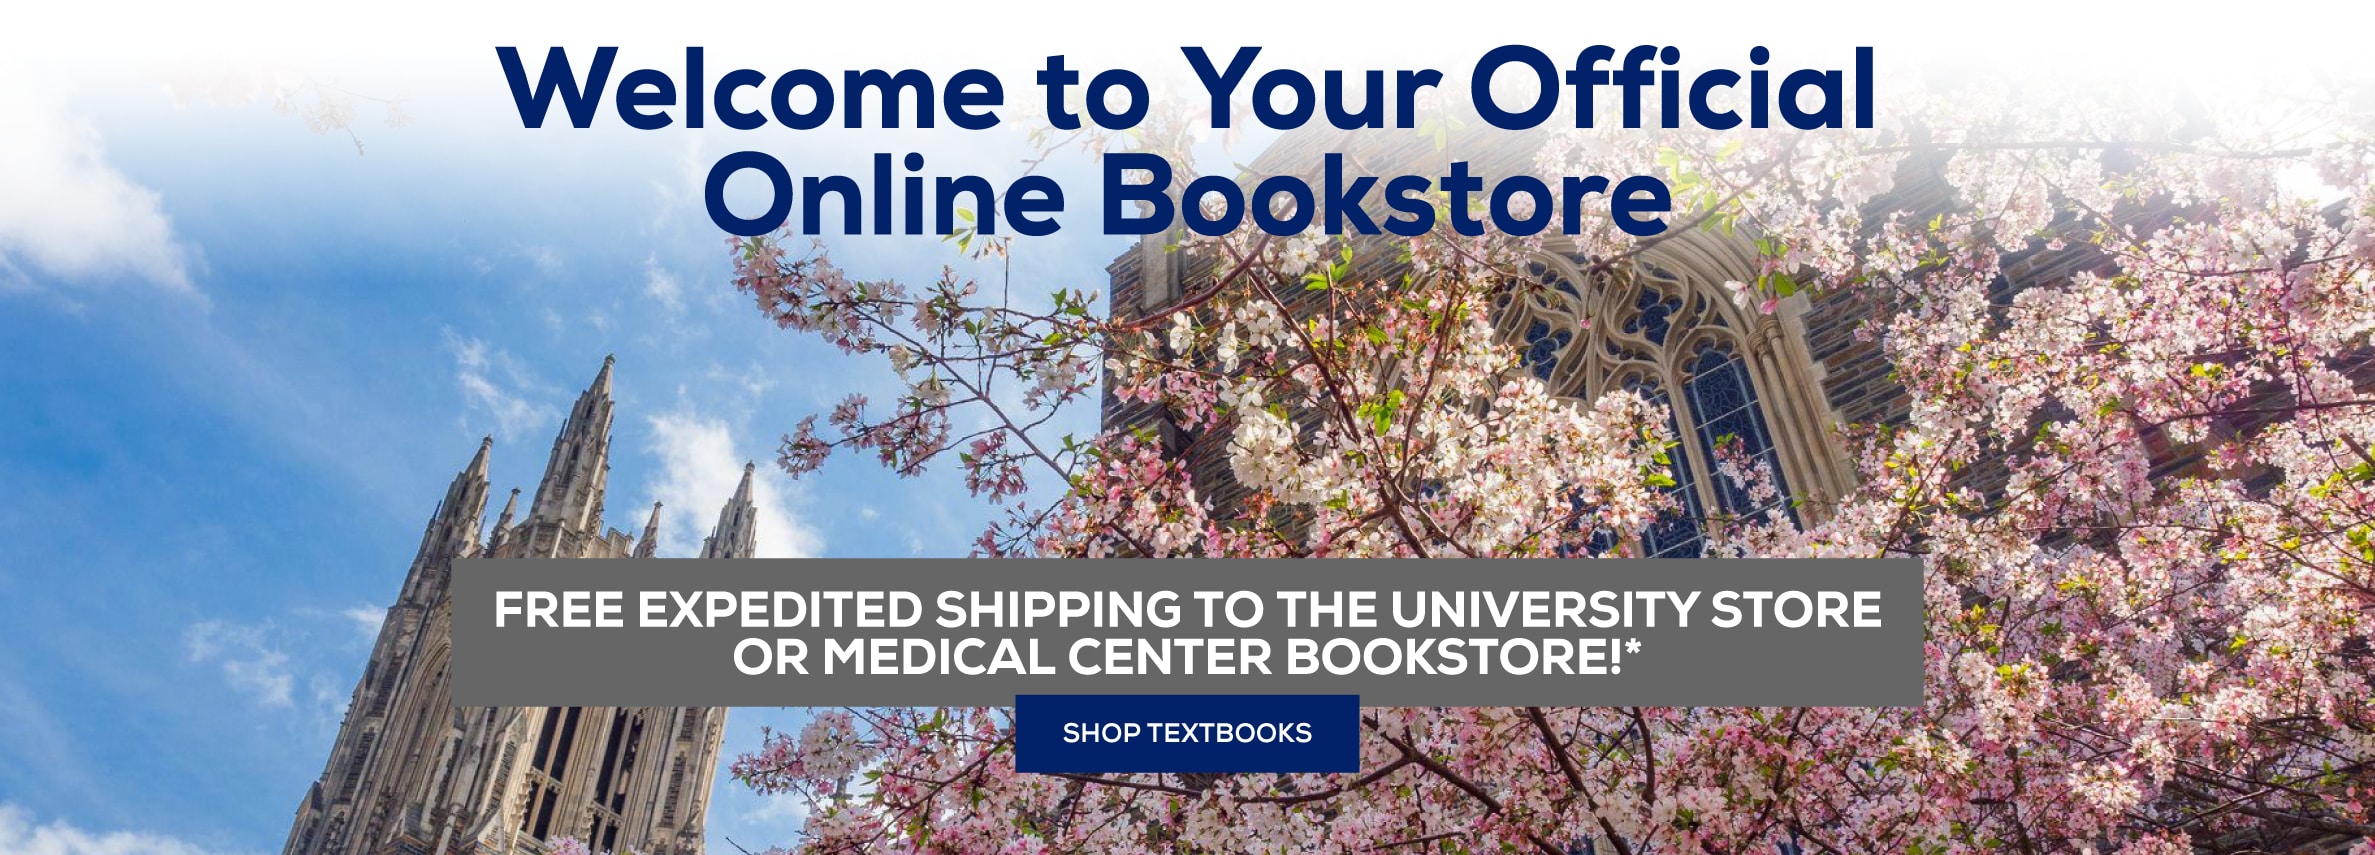 Welcome to Your New Official Online Bookstore